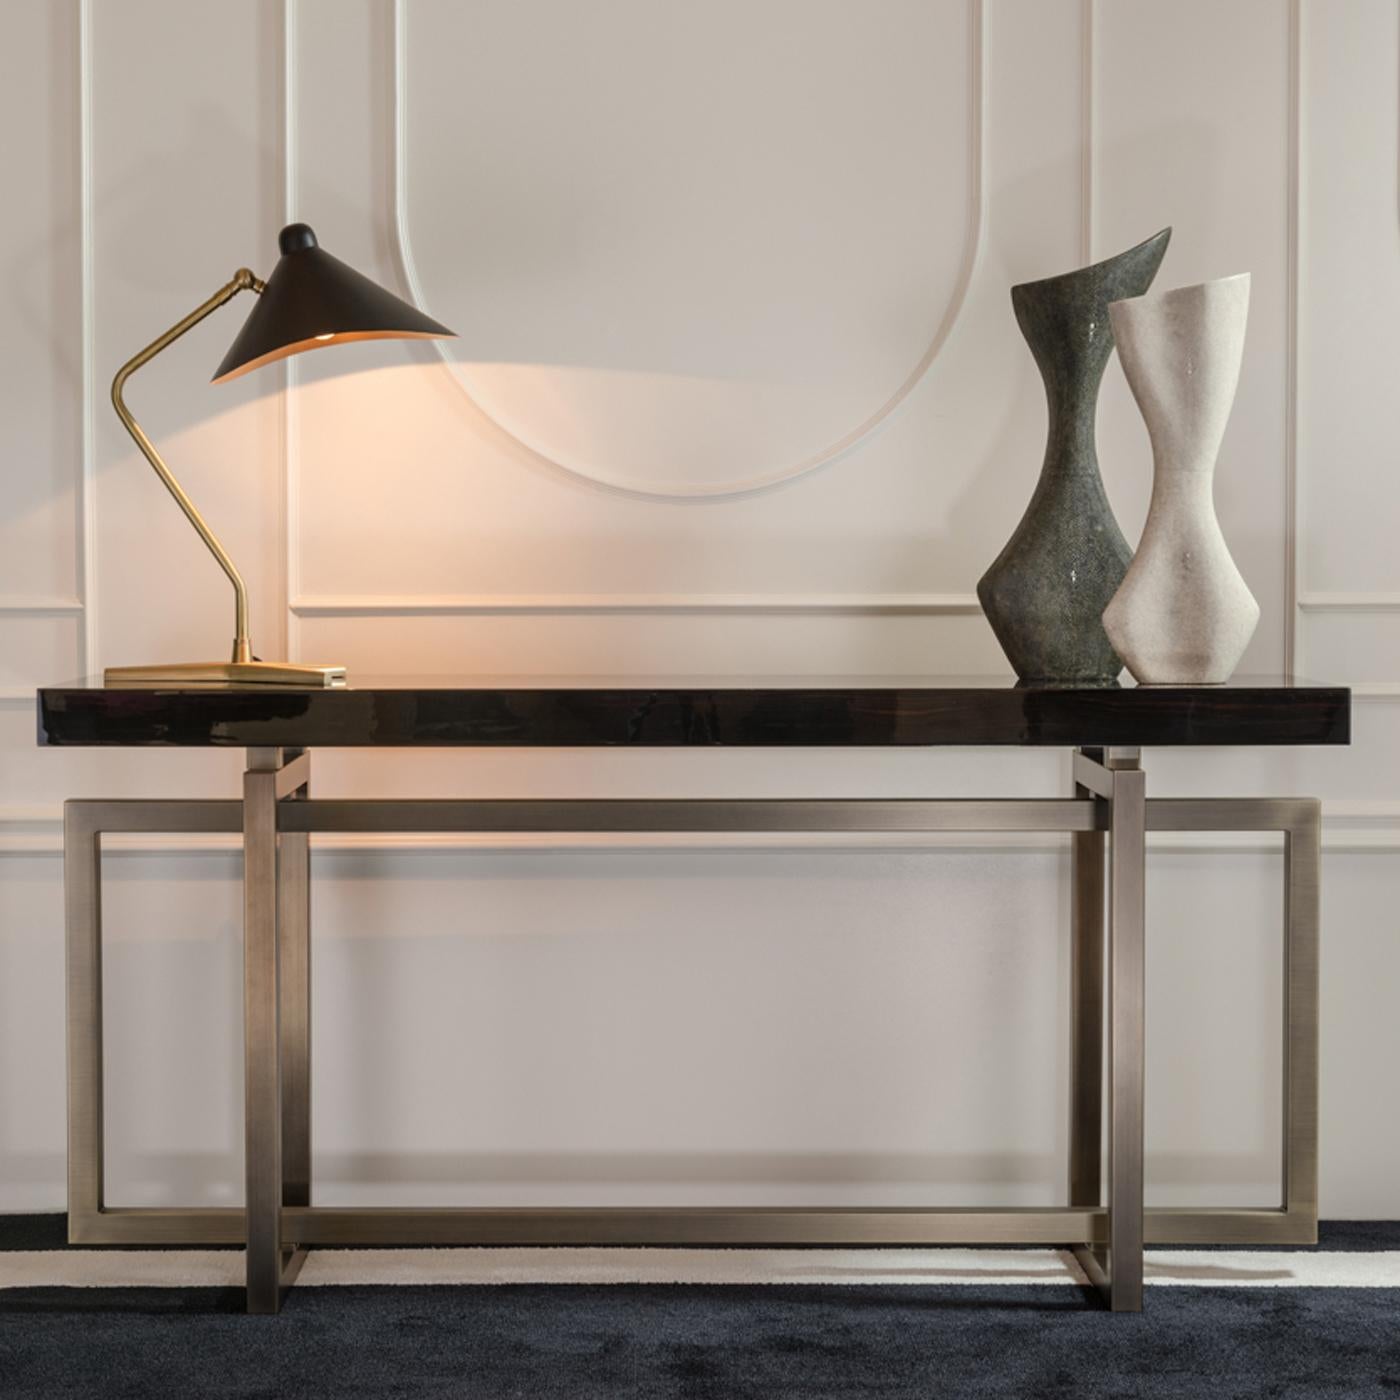 Stunning from all sides, this sculptural console boasts a unique design that can be showcased as a statement piece at the center of a large room or loft space to create visual and spatial division. The 7 cm-thick rectangular top of glossy Macassar